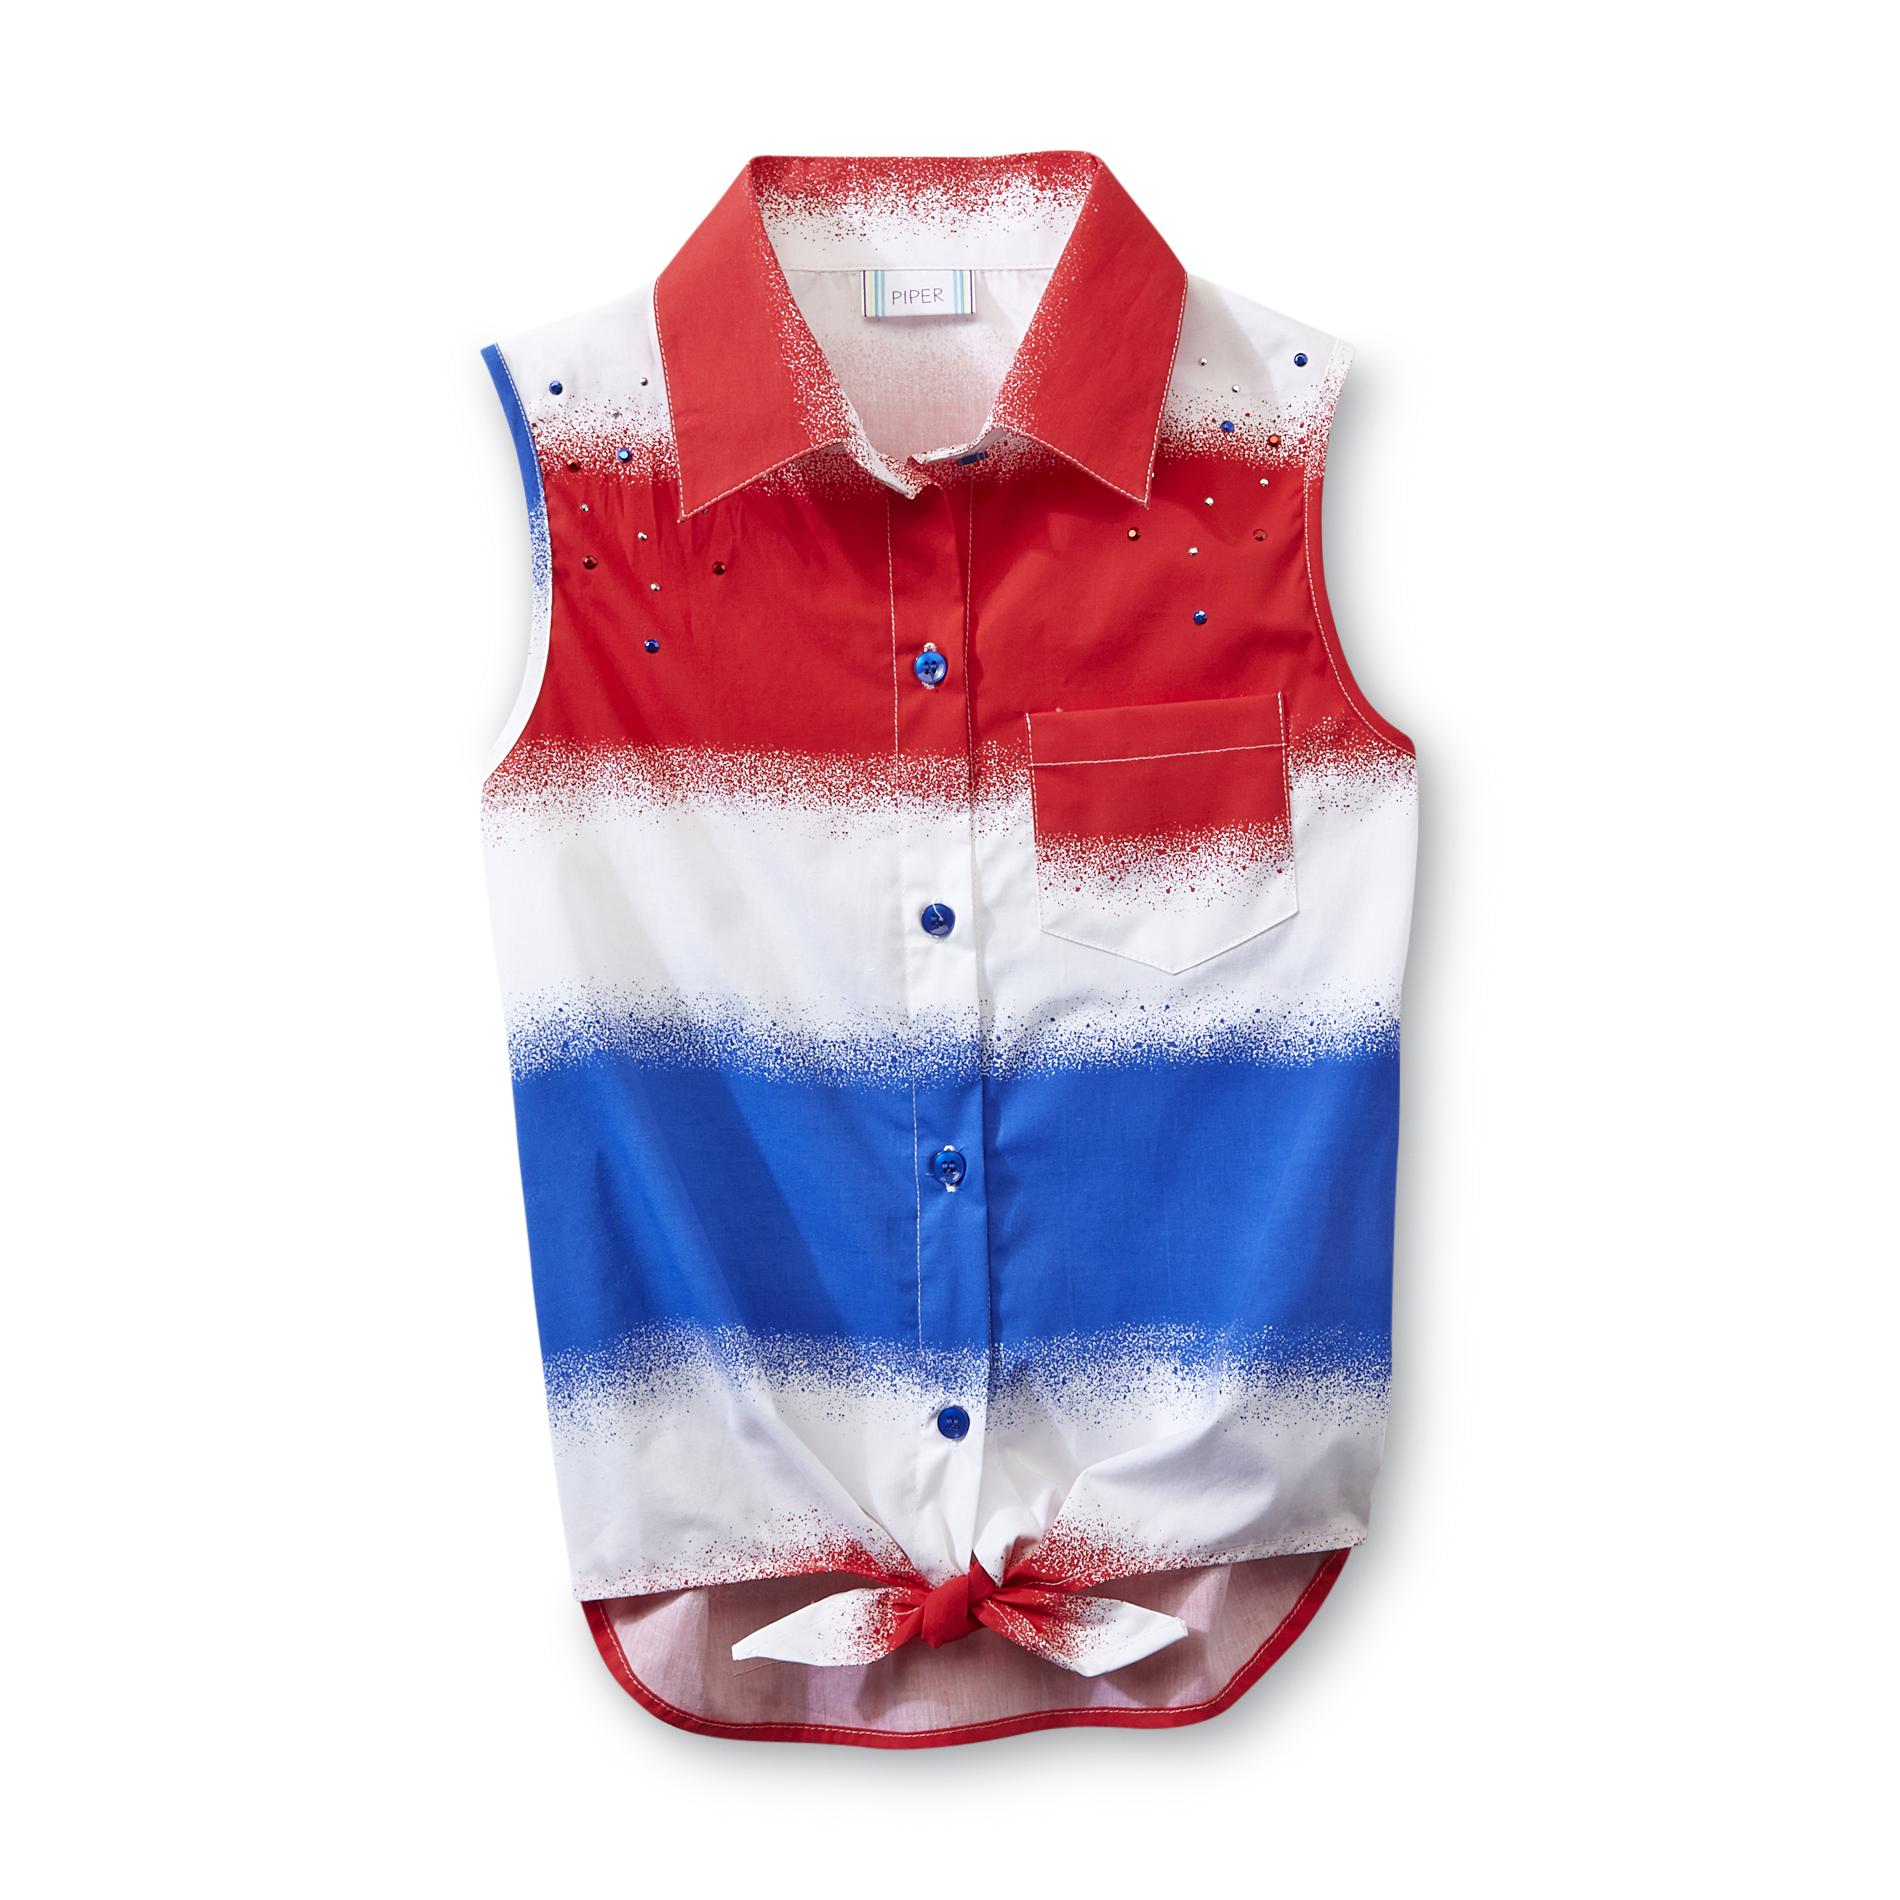 Piper Girl's Sleeveless Tie-Front Top - Red  White & Blue